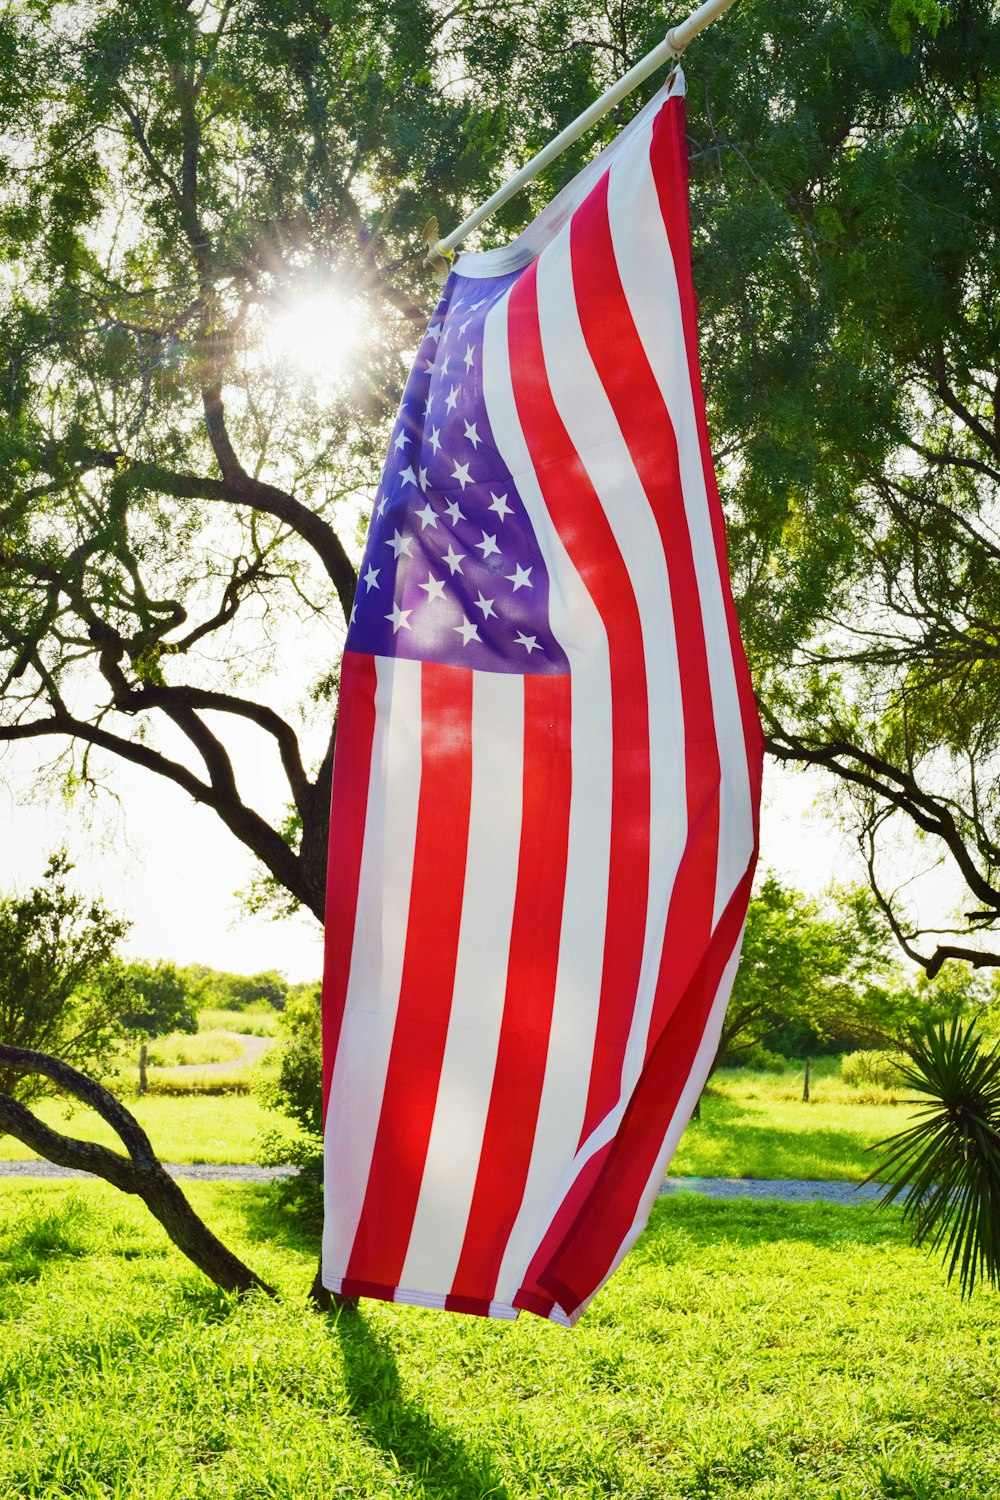 U.S.A flag hanging on pole while sunlight piercing through trees